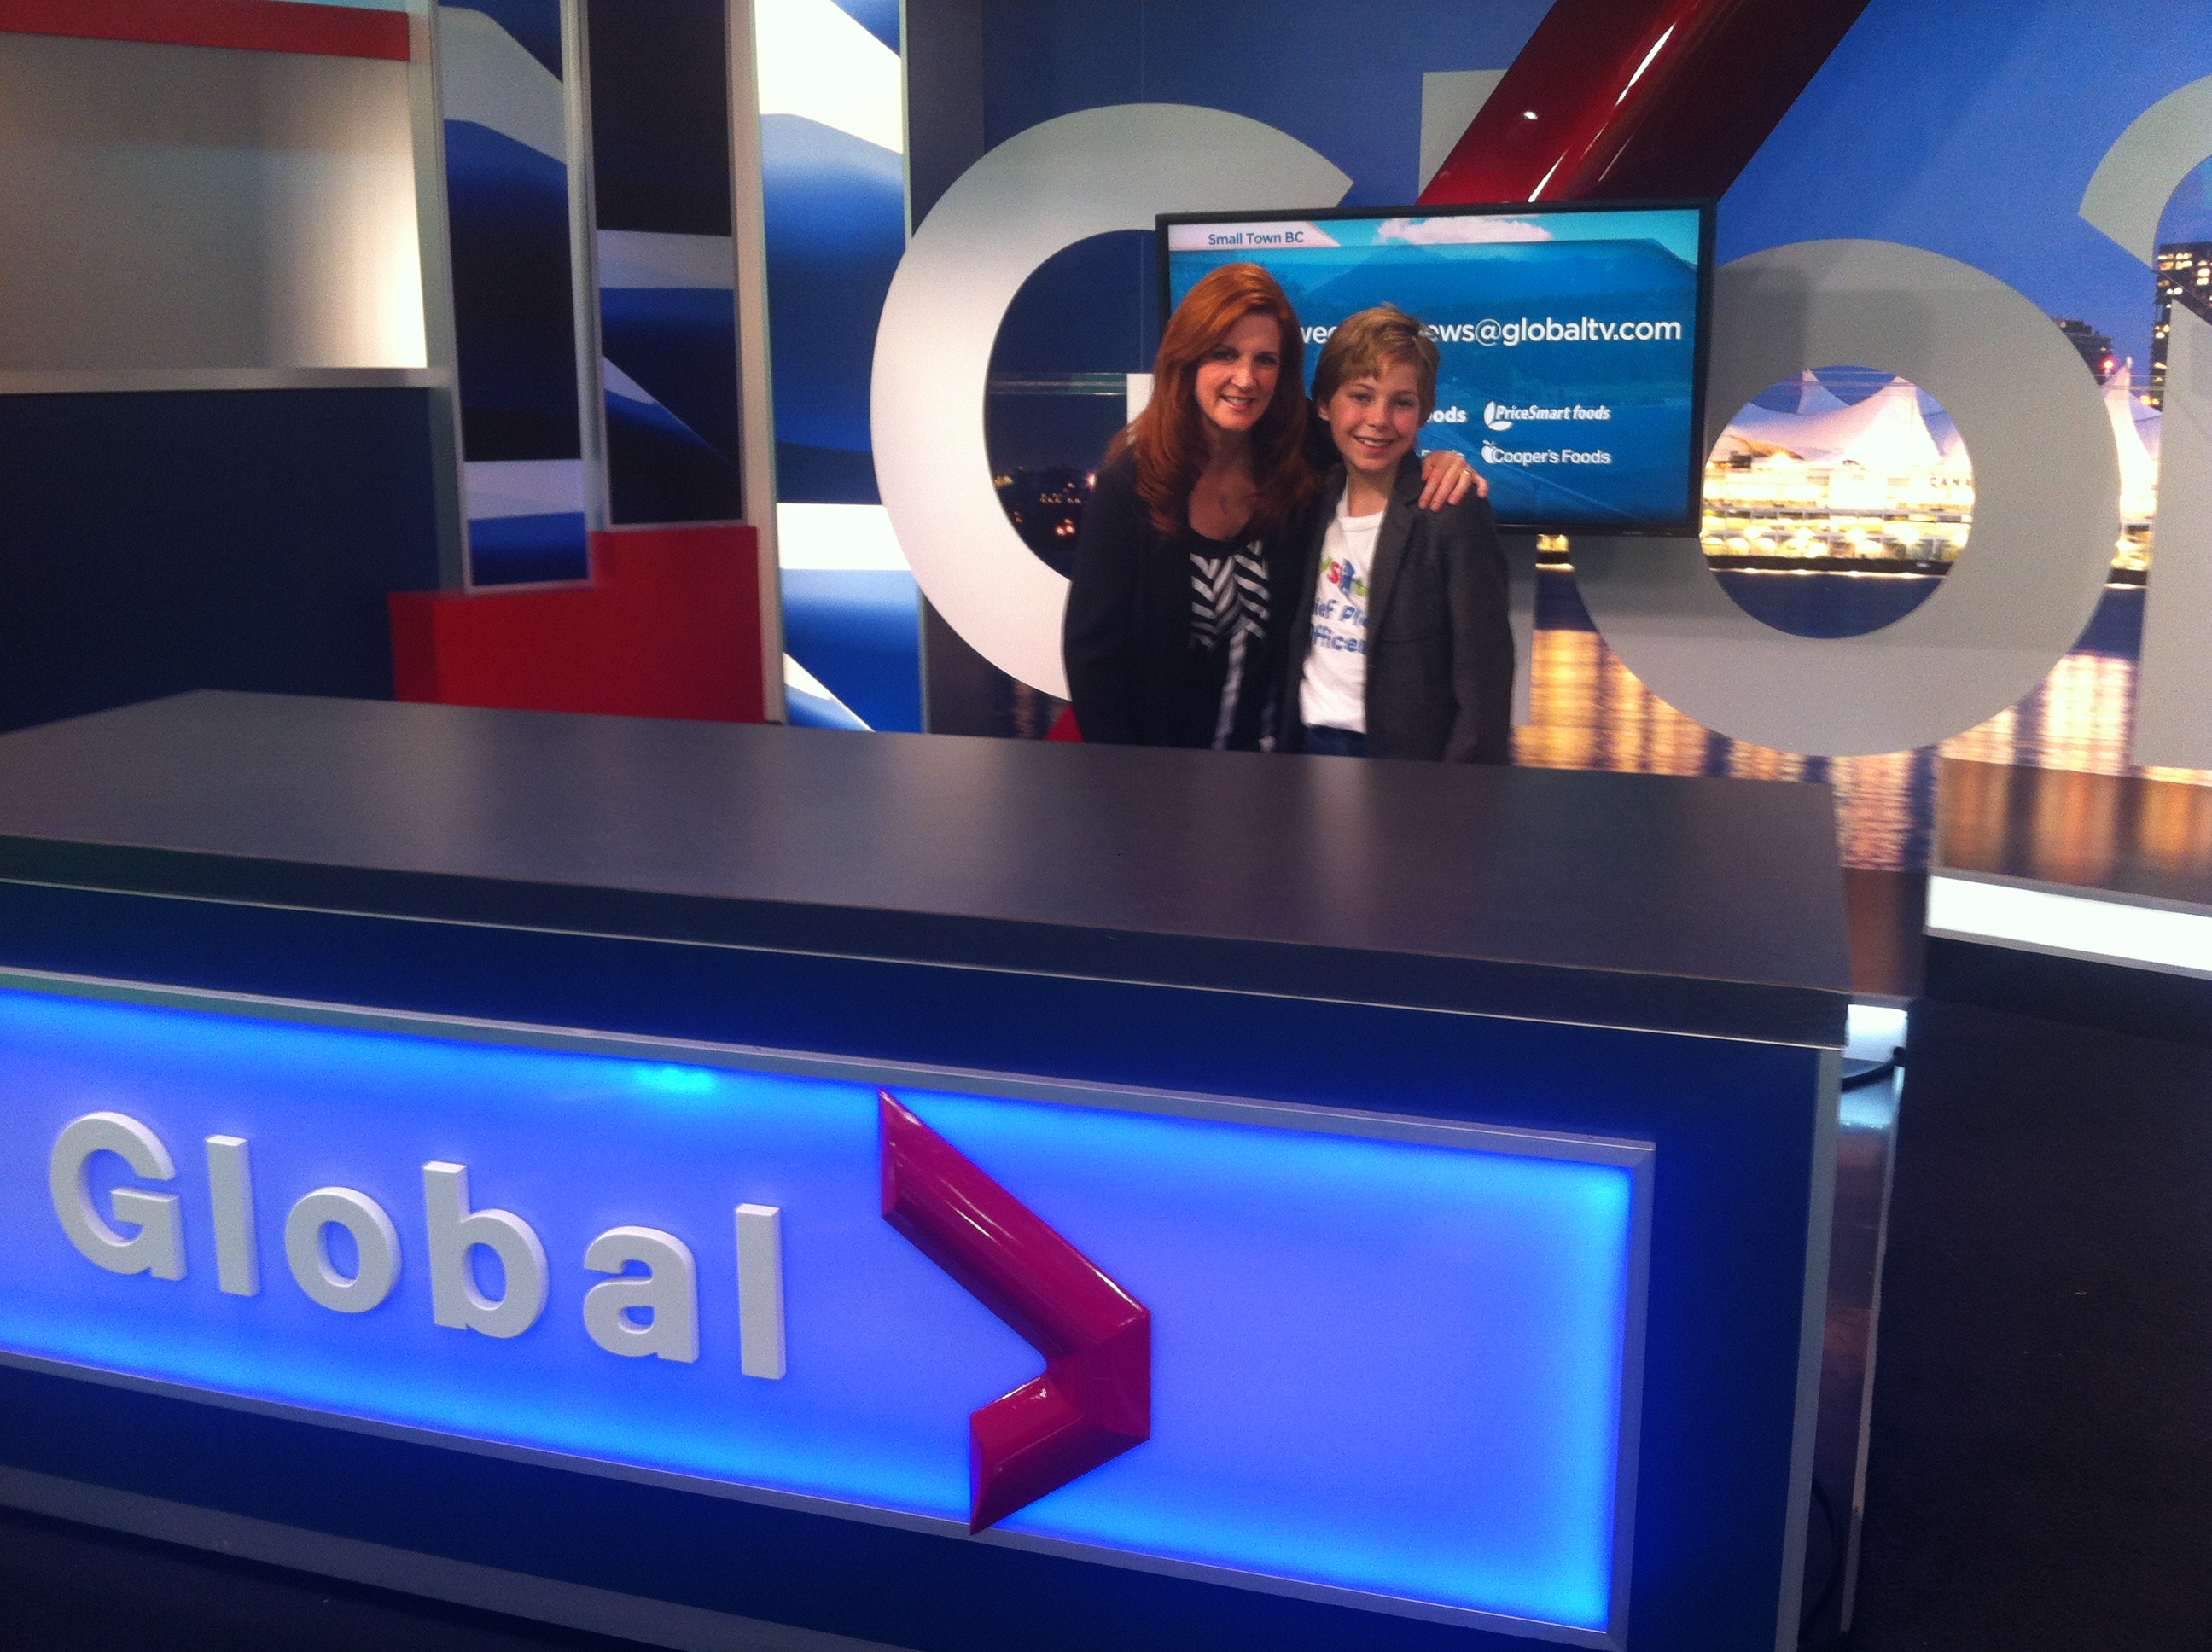 On The Morning Show on Global BC - as Chief Play Officer (National Spokesperson) for Toys R Us Canada